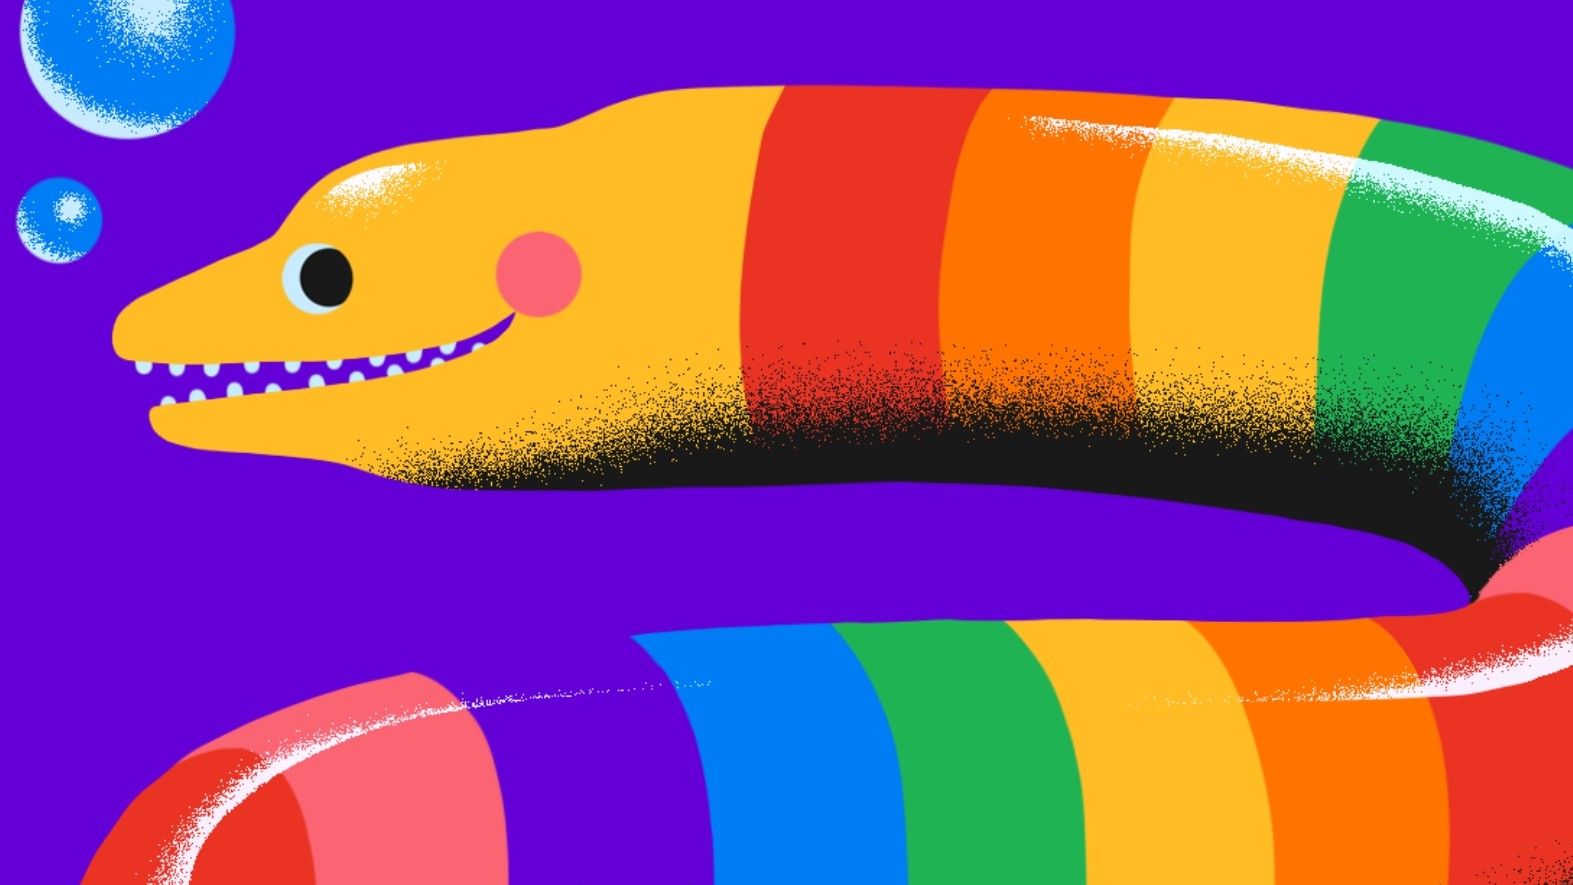 Google Wallpaper Celebrates Pride Month With Fabulous Rainbow Hued Collection